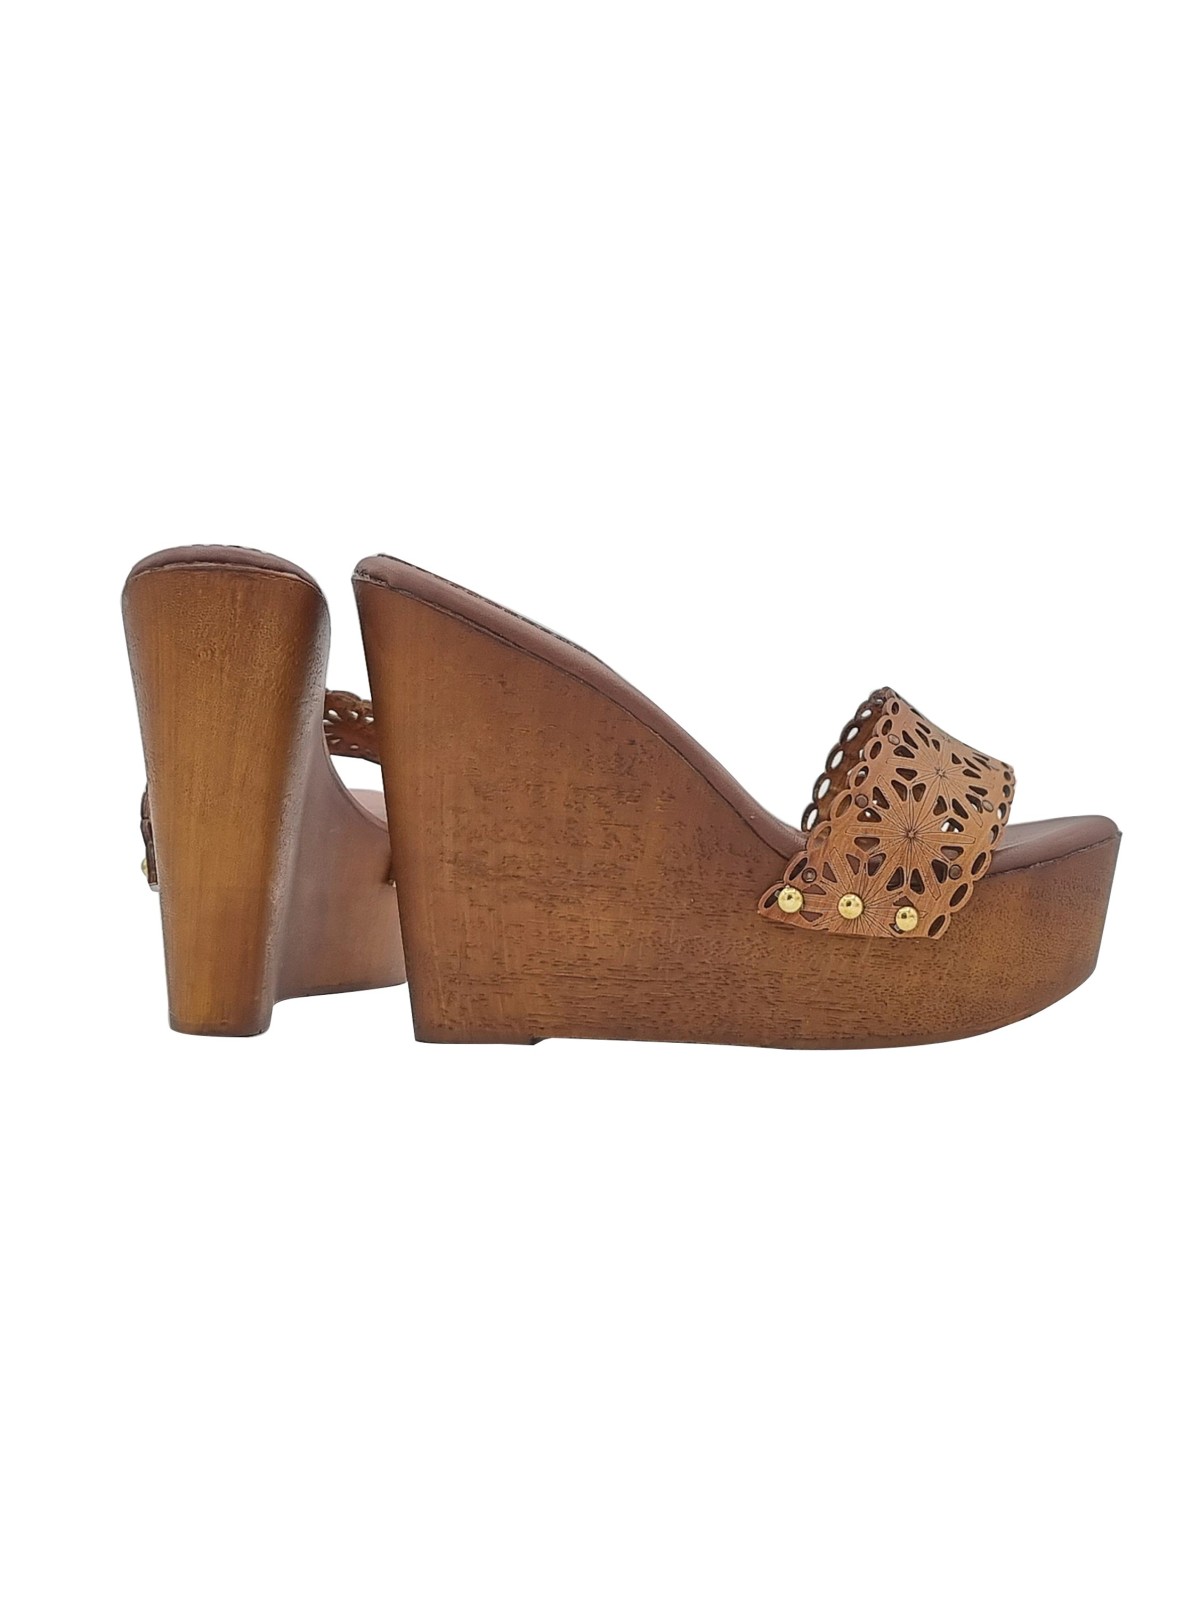 BROWN WEDGE SANDALS WITH LASERED BAND